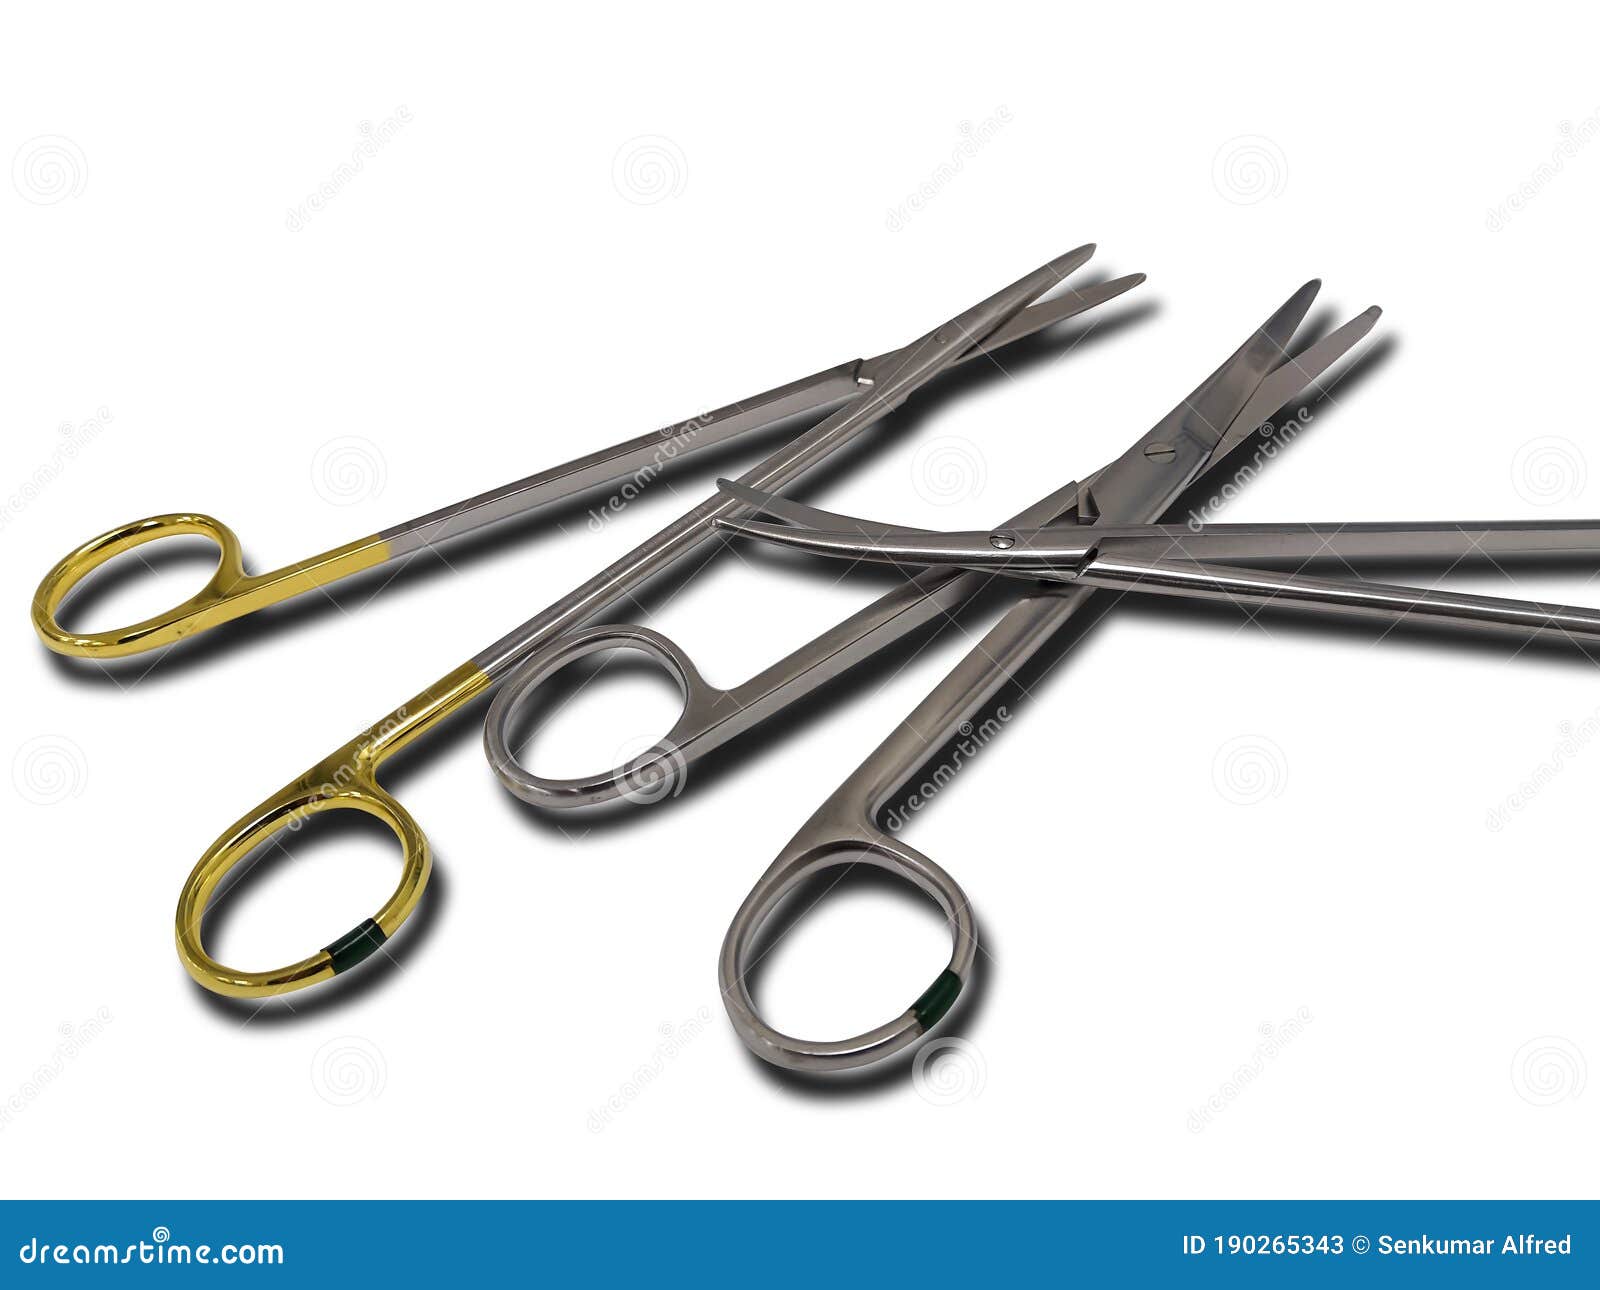 412 Blunt Scissors Royalty-Free Images, Stock Photos & Pictures